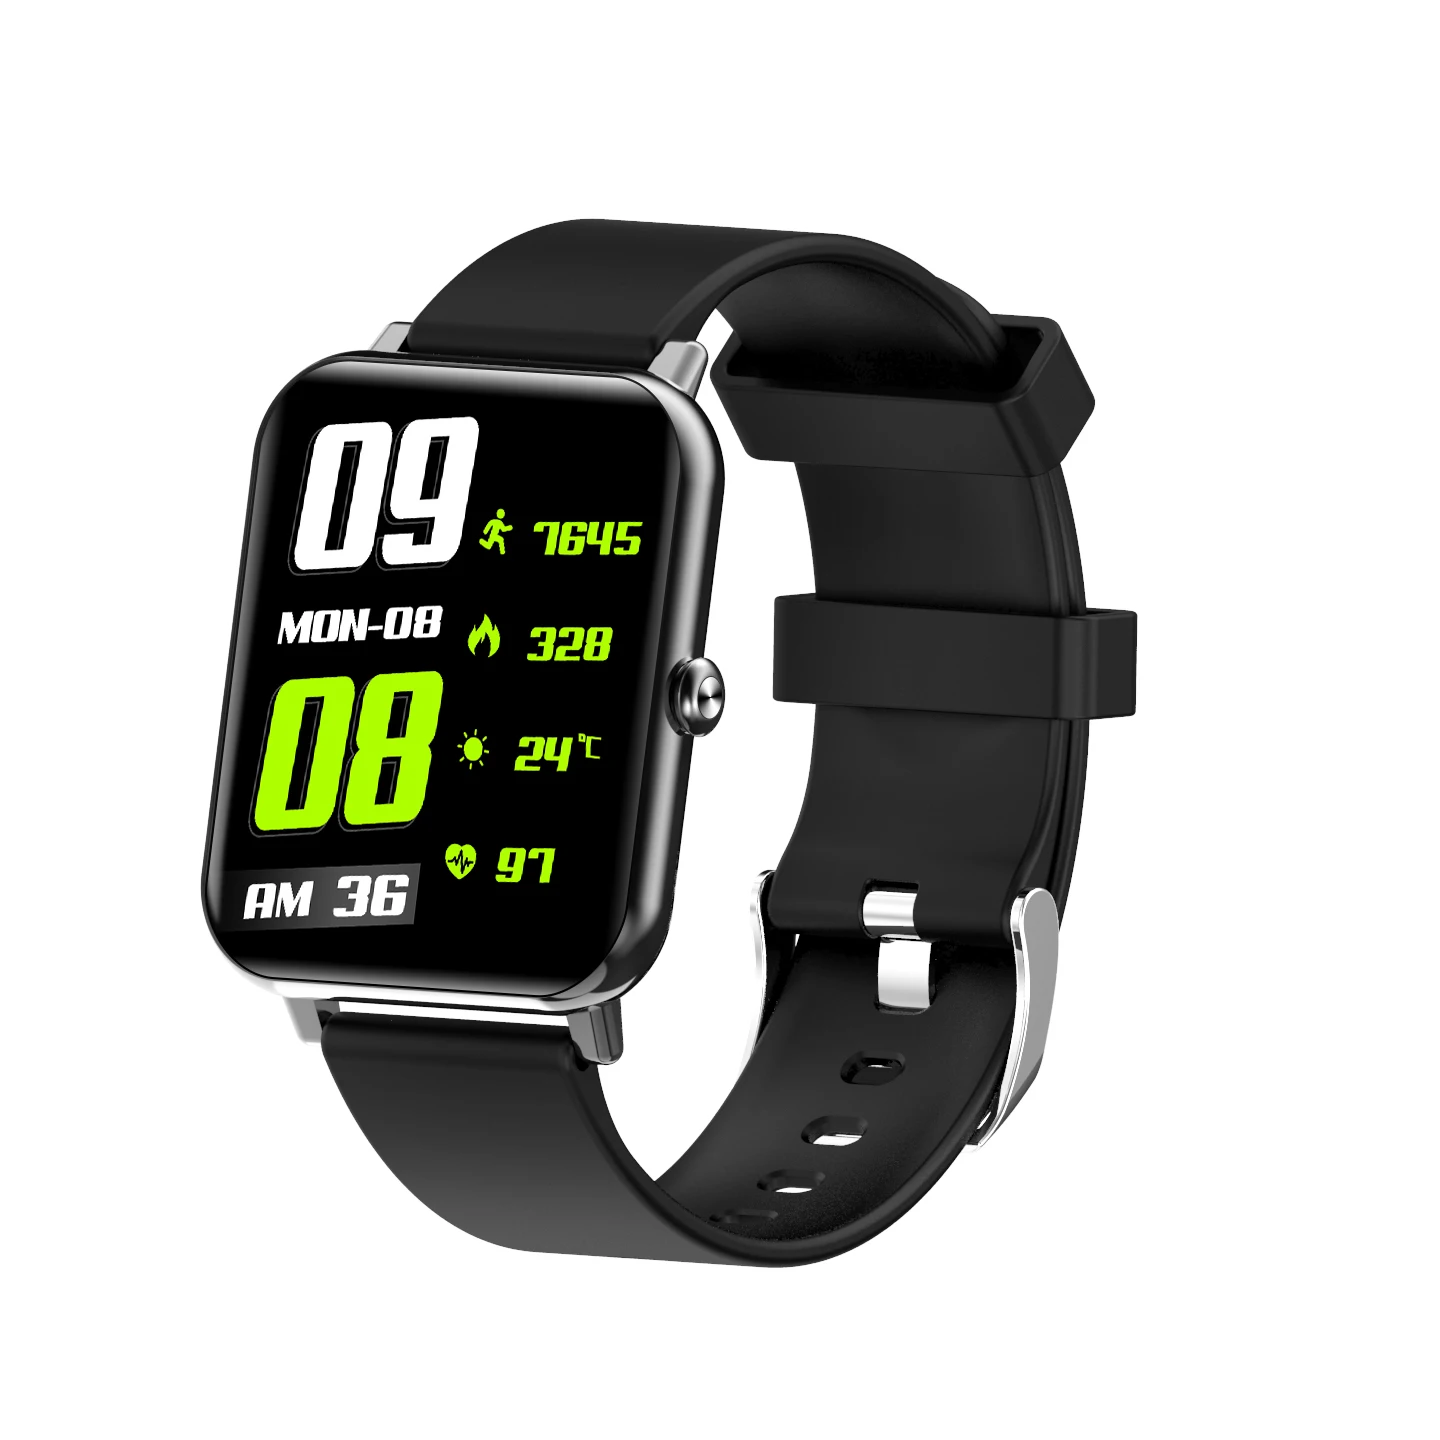 Fashion  Remote control photography Smart home Application Control  IOS Android system matching waterproof Smart Watch